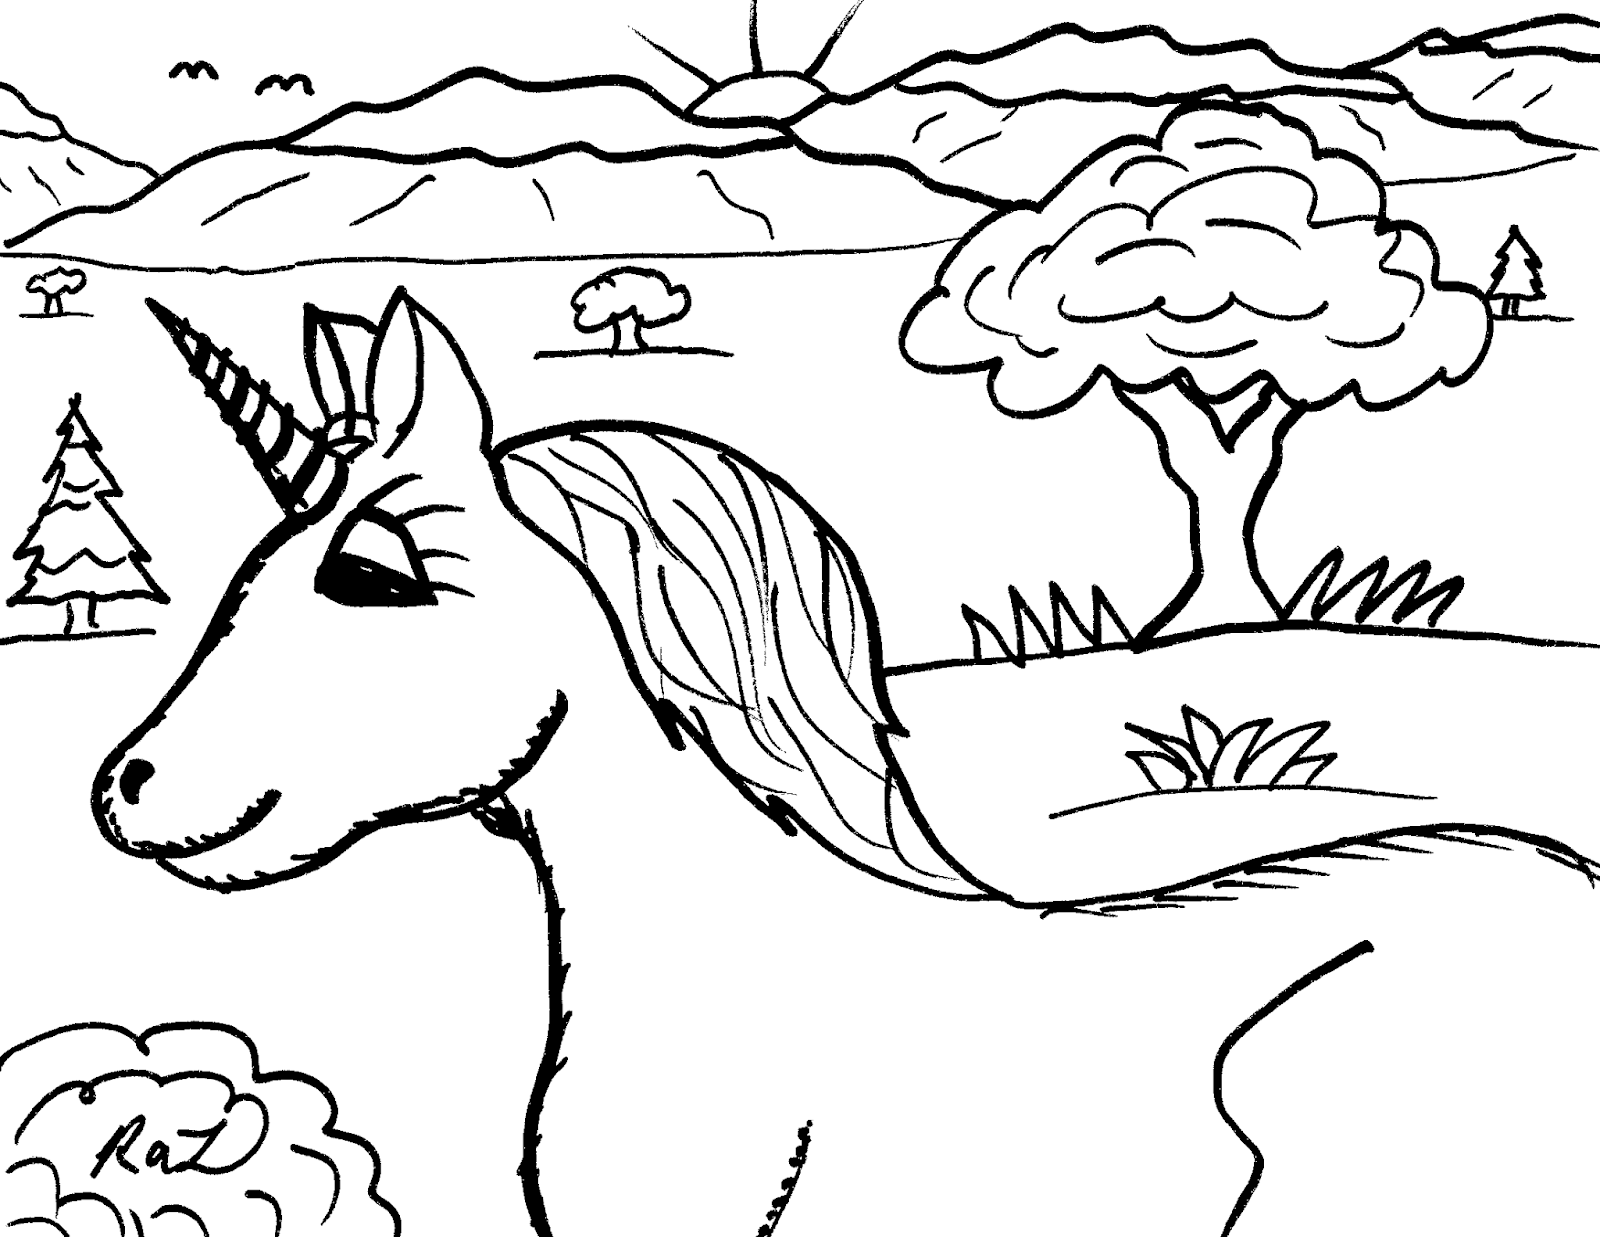 Robin's Great Coloring Pages: Unicorn Cartoon Drawings To Color - Coloring  Home